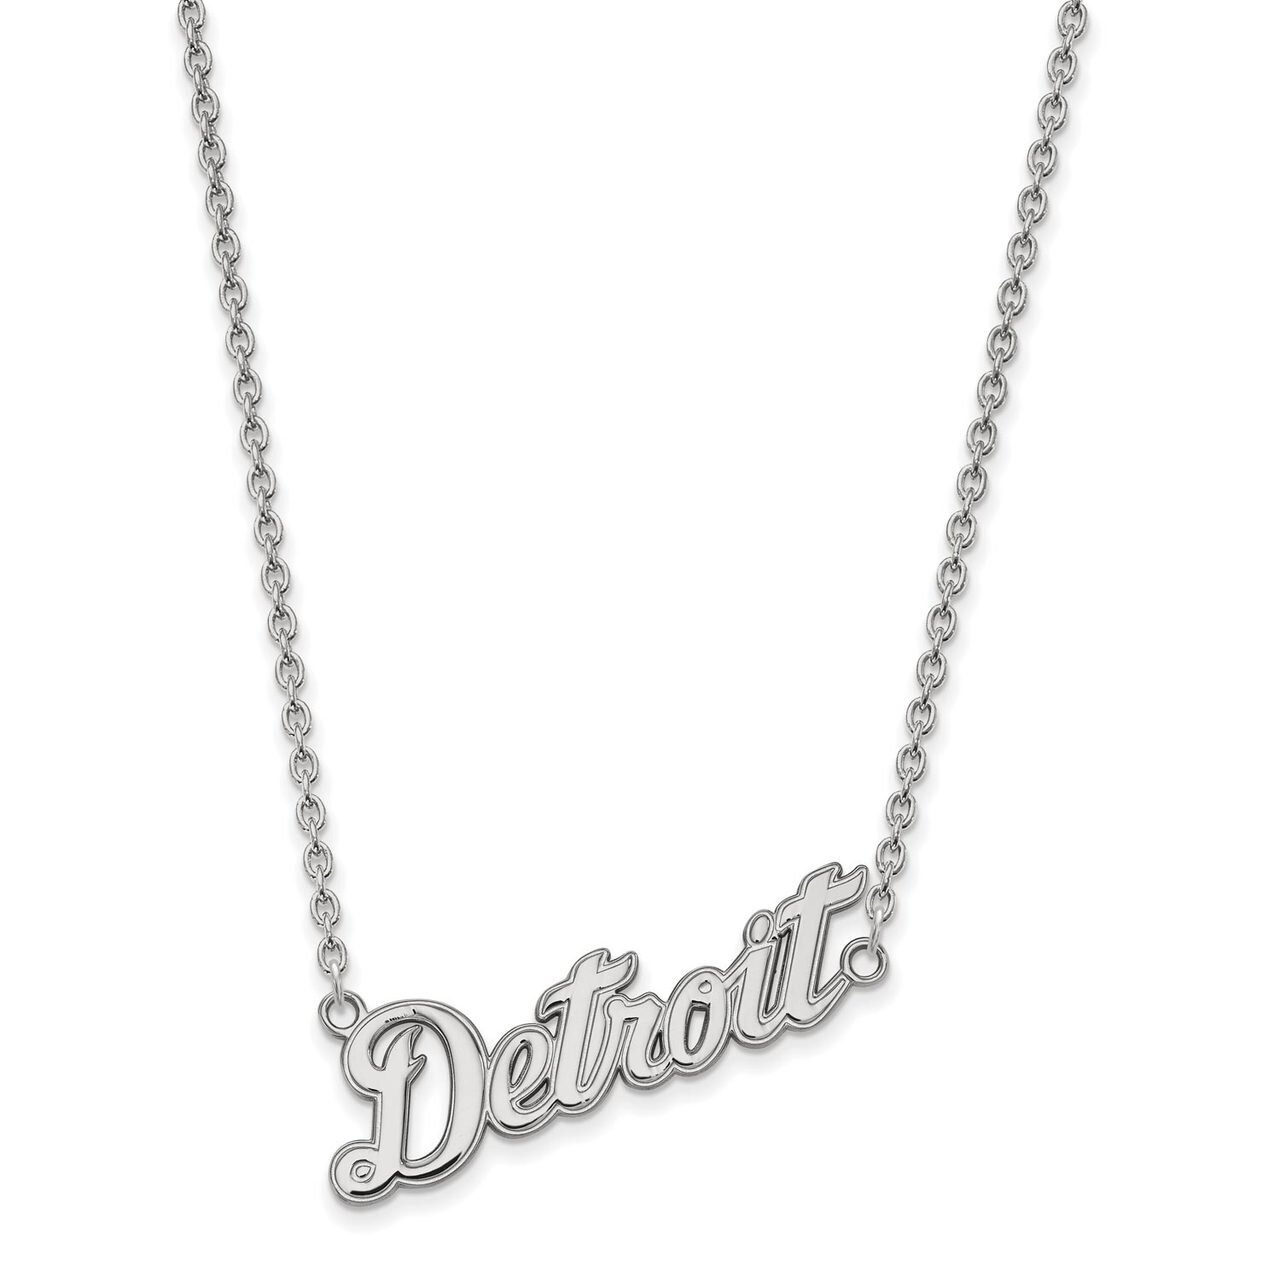 Detroit Tigers Large Pendant with Chain Necklace 14k White Gold 4W062TIG-18